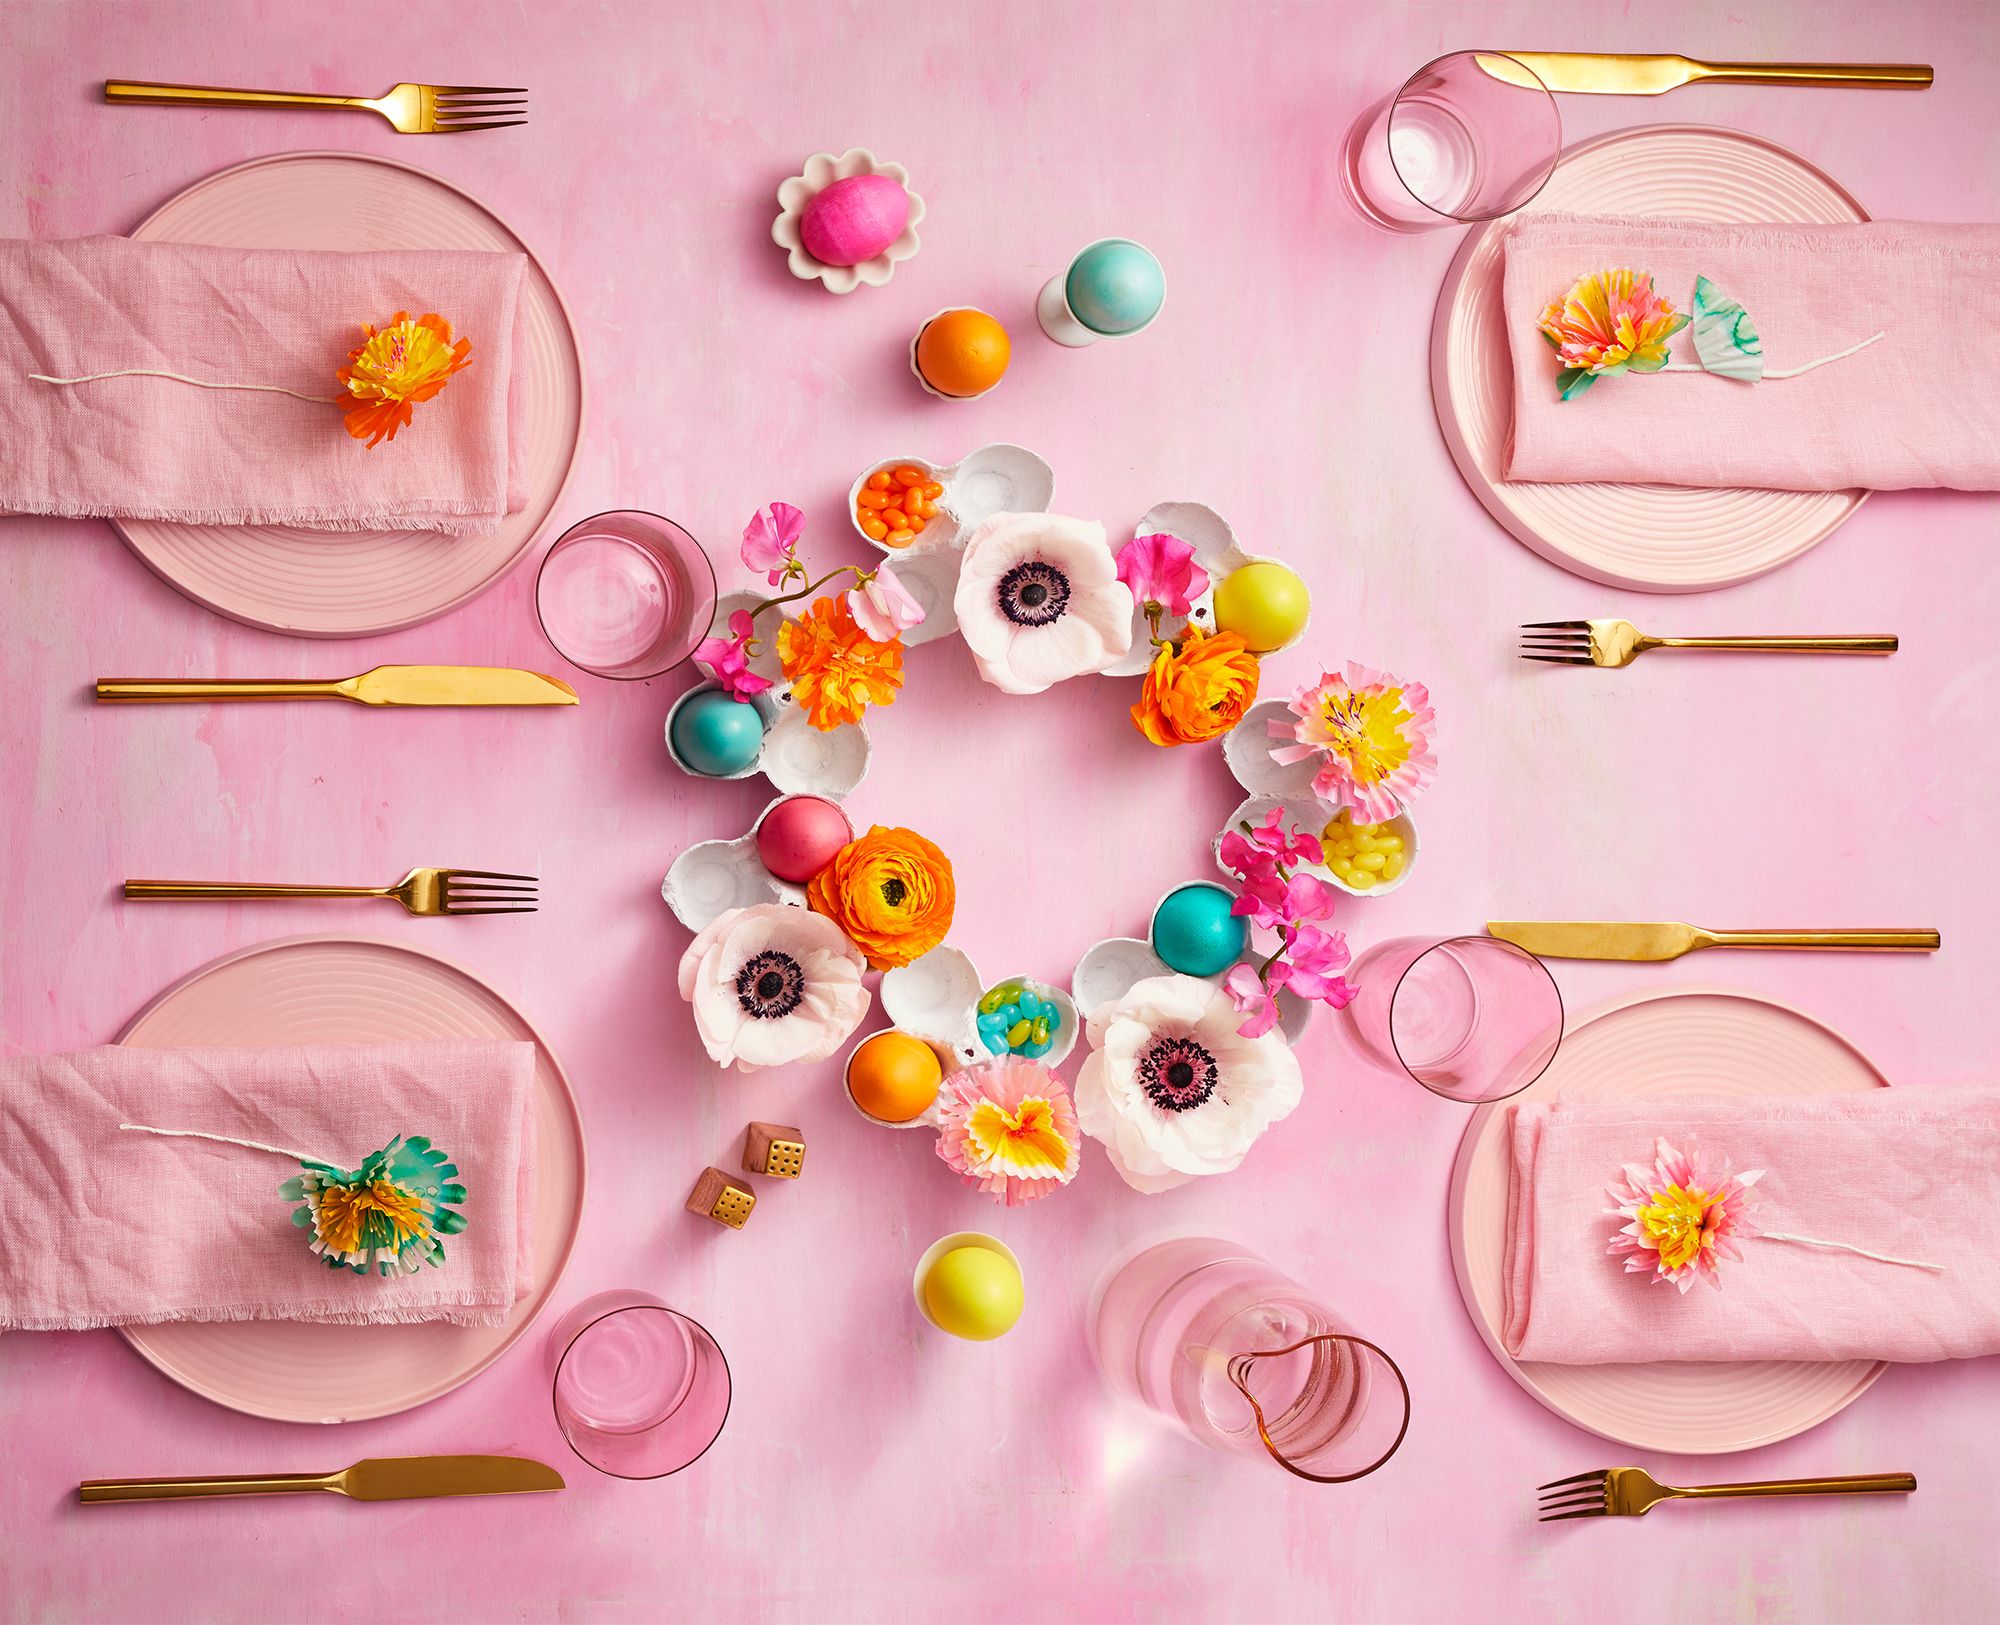 60 Best Easter Decoration Ideas 2021 Diy Table Home Decor For Easter Sunday